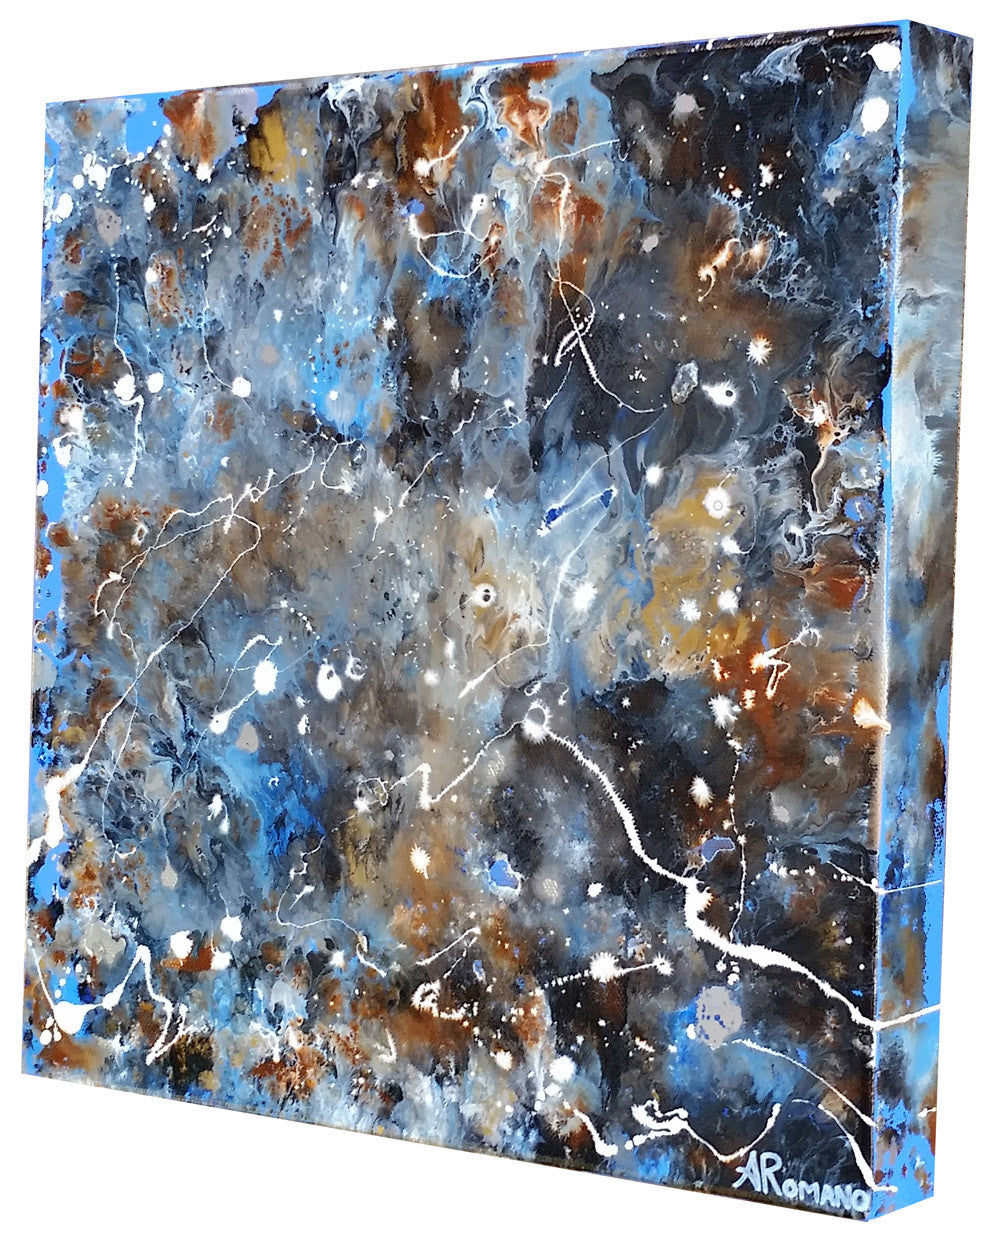 Cosmic Modern Abstract Art Original Painting Blue Splatter Paint Sides Painted Ready to Hang